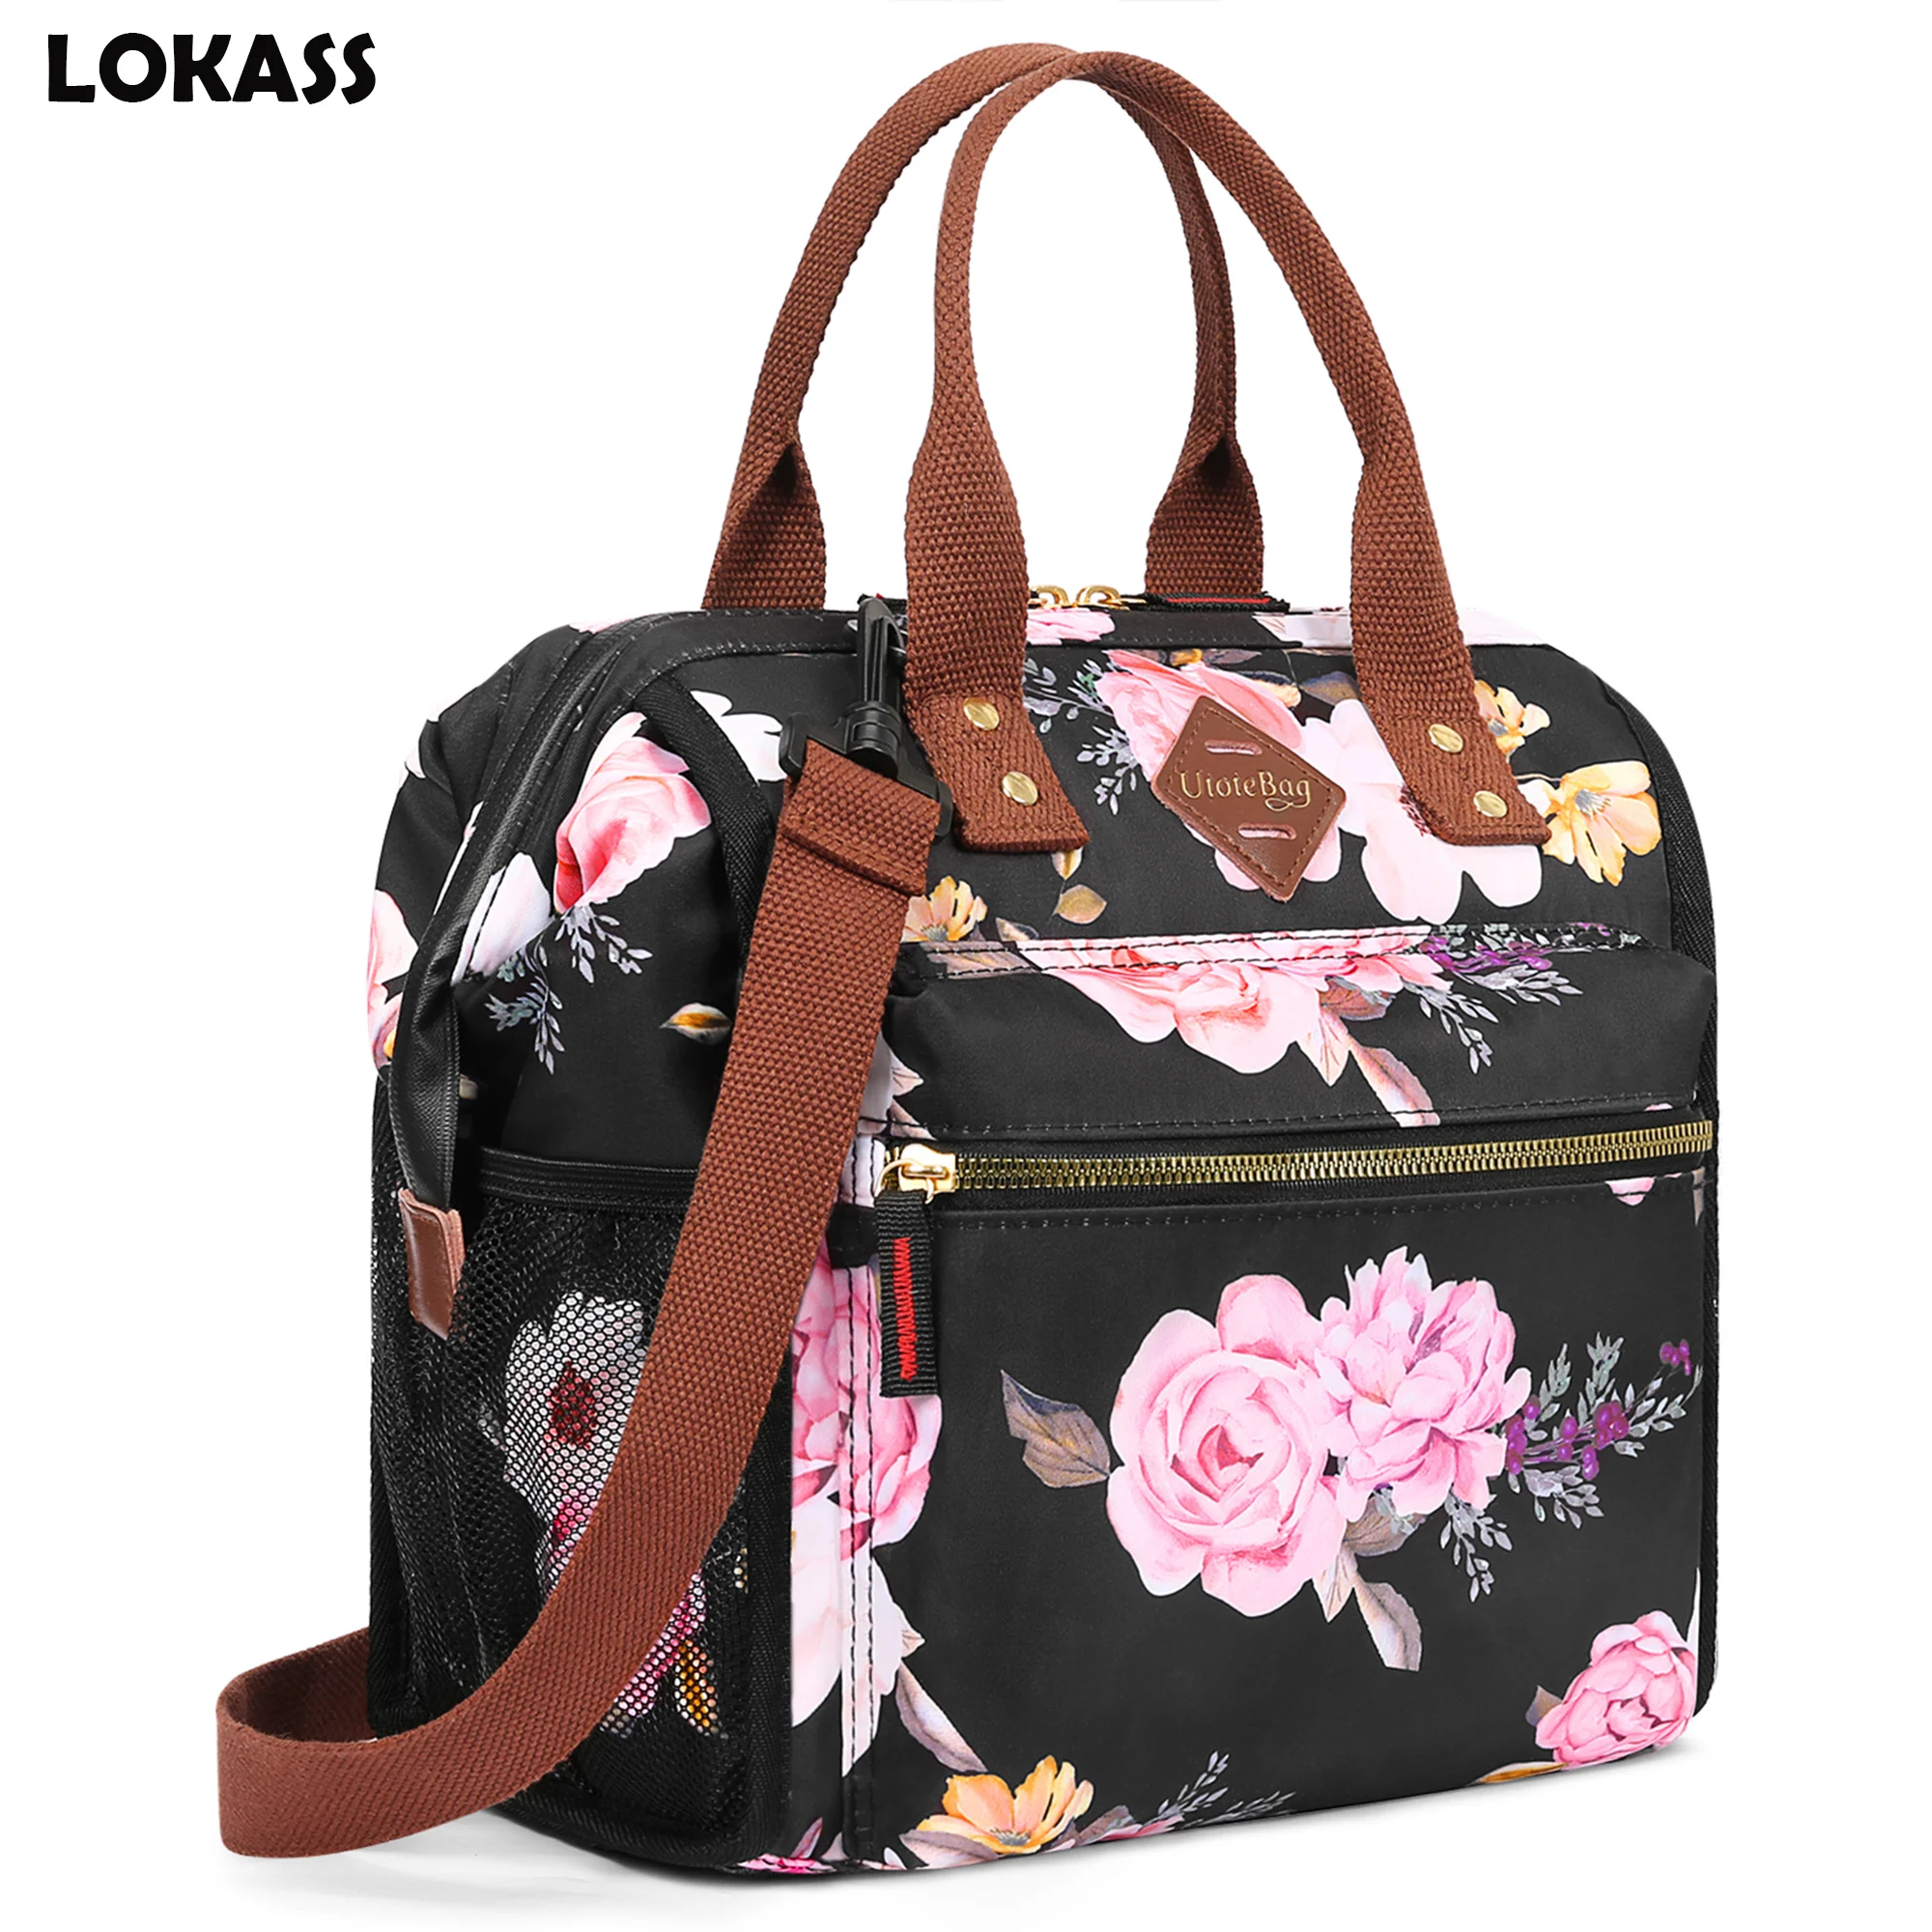 LOKASS Lunch Bag Women Insulated Lunch Box Water-resistant Lunch Tote Thermal Lunch Cooler Soft Liner Lunch Bags for Girls Lady our lady of mount carmel canvas backpack for boys girls catholic virgin mary school college travel bags women men bookbag